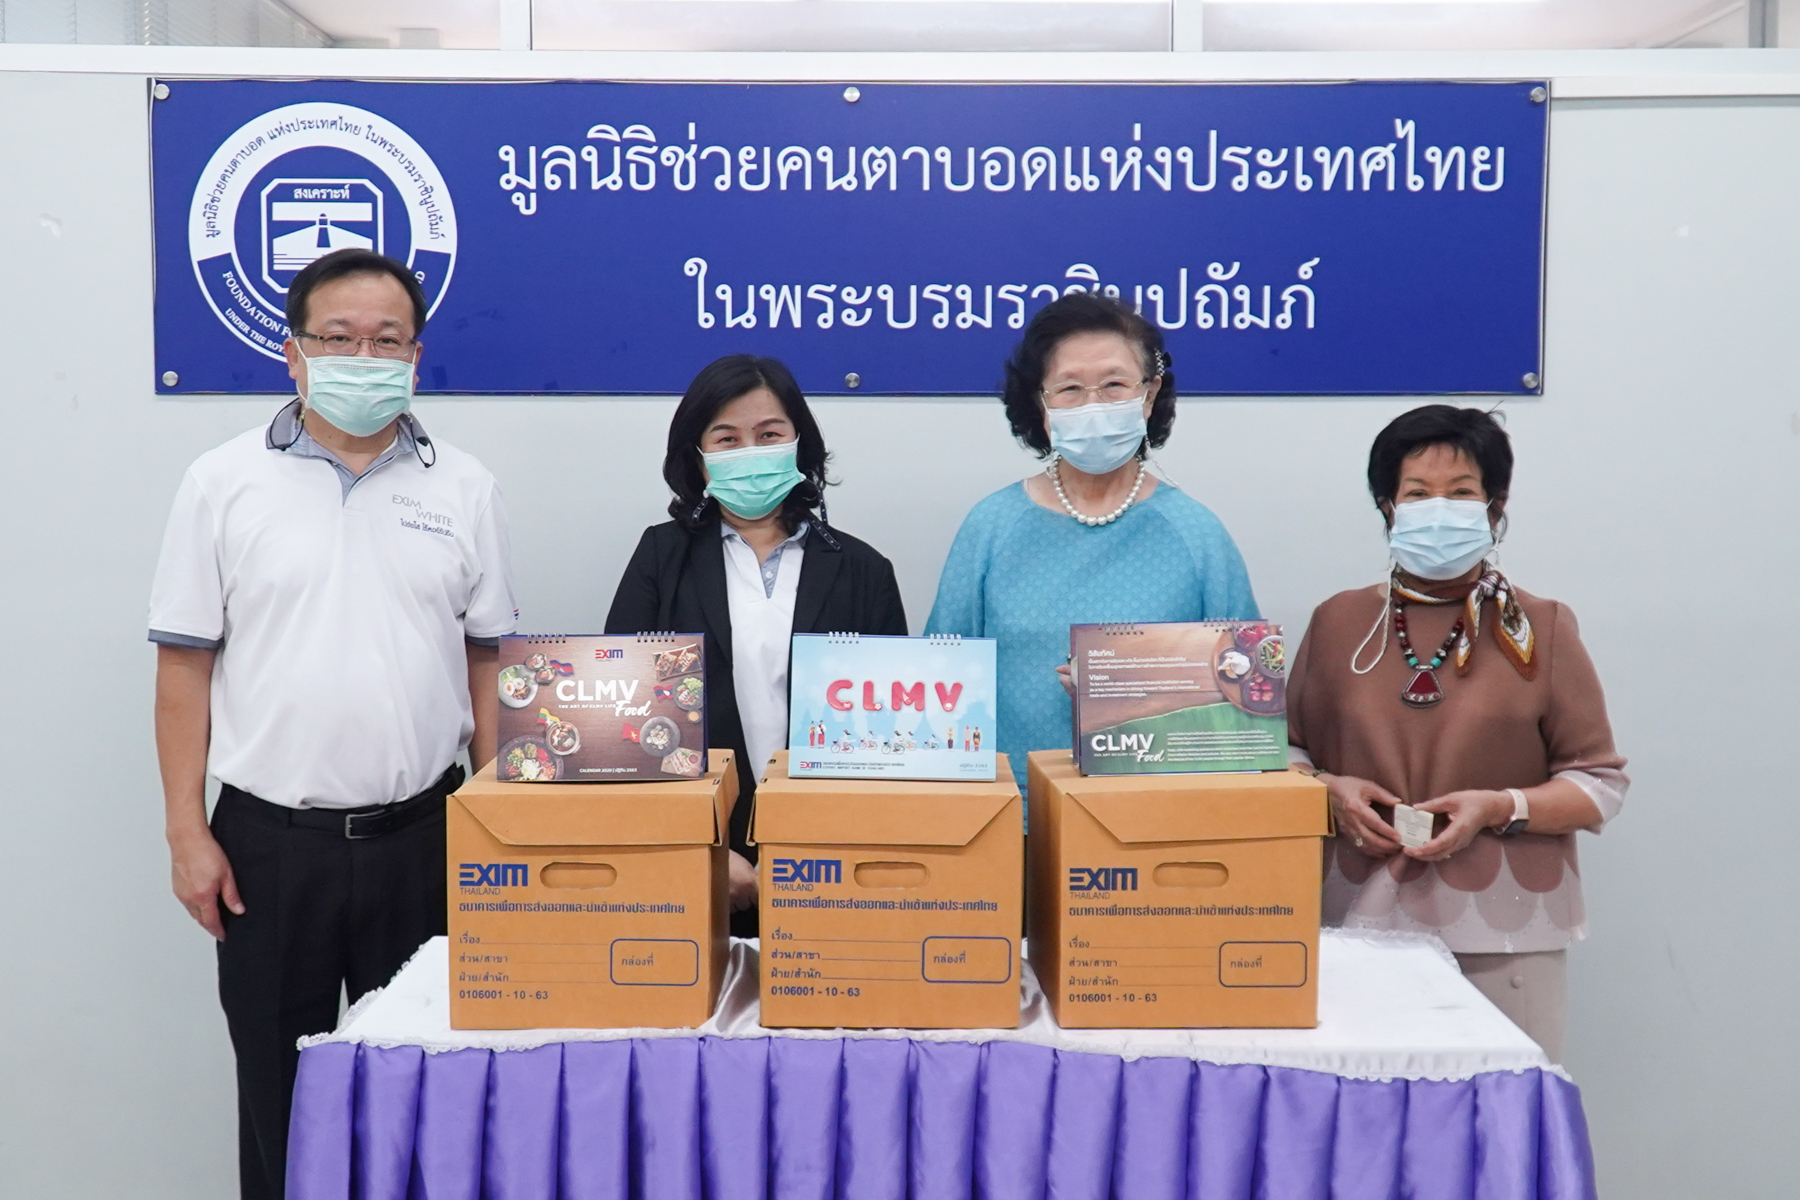 EXIM Thailand Donates Used Calendars to Foundation for the Blind in Thailand under the Royal Patronage of H.M. the Queen for Reuse as Braille Educational Materials for Visually Impaired Students